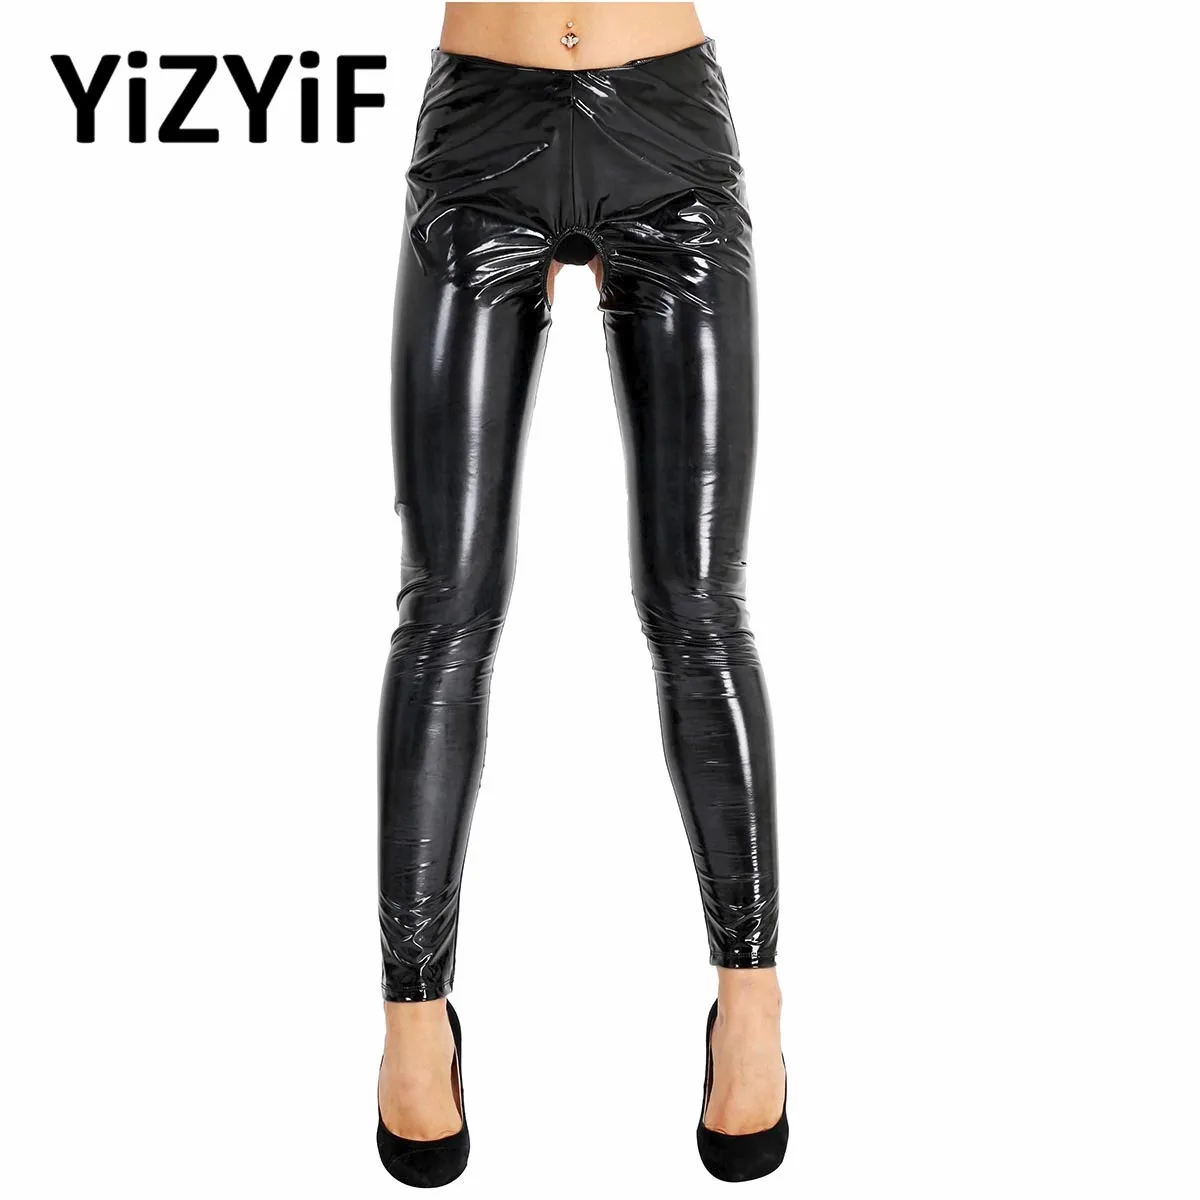 

Women Wetlook Patent Leather Open Crotch and Butt Leggings Pants Latex Backless Trousers Nightclub Pole Dancing Clothes Clubwear